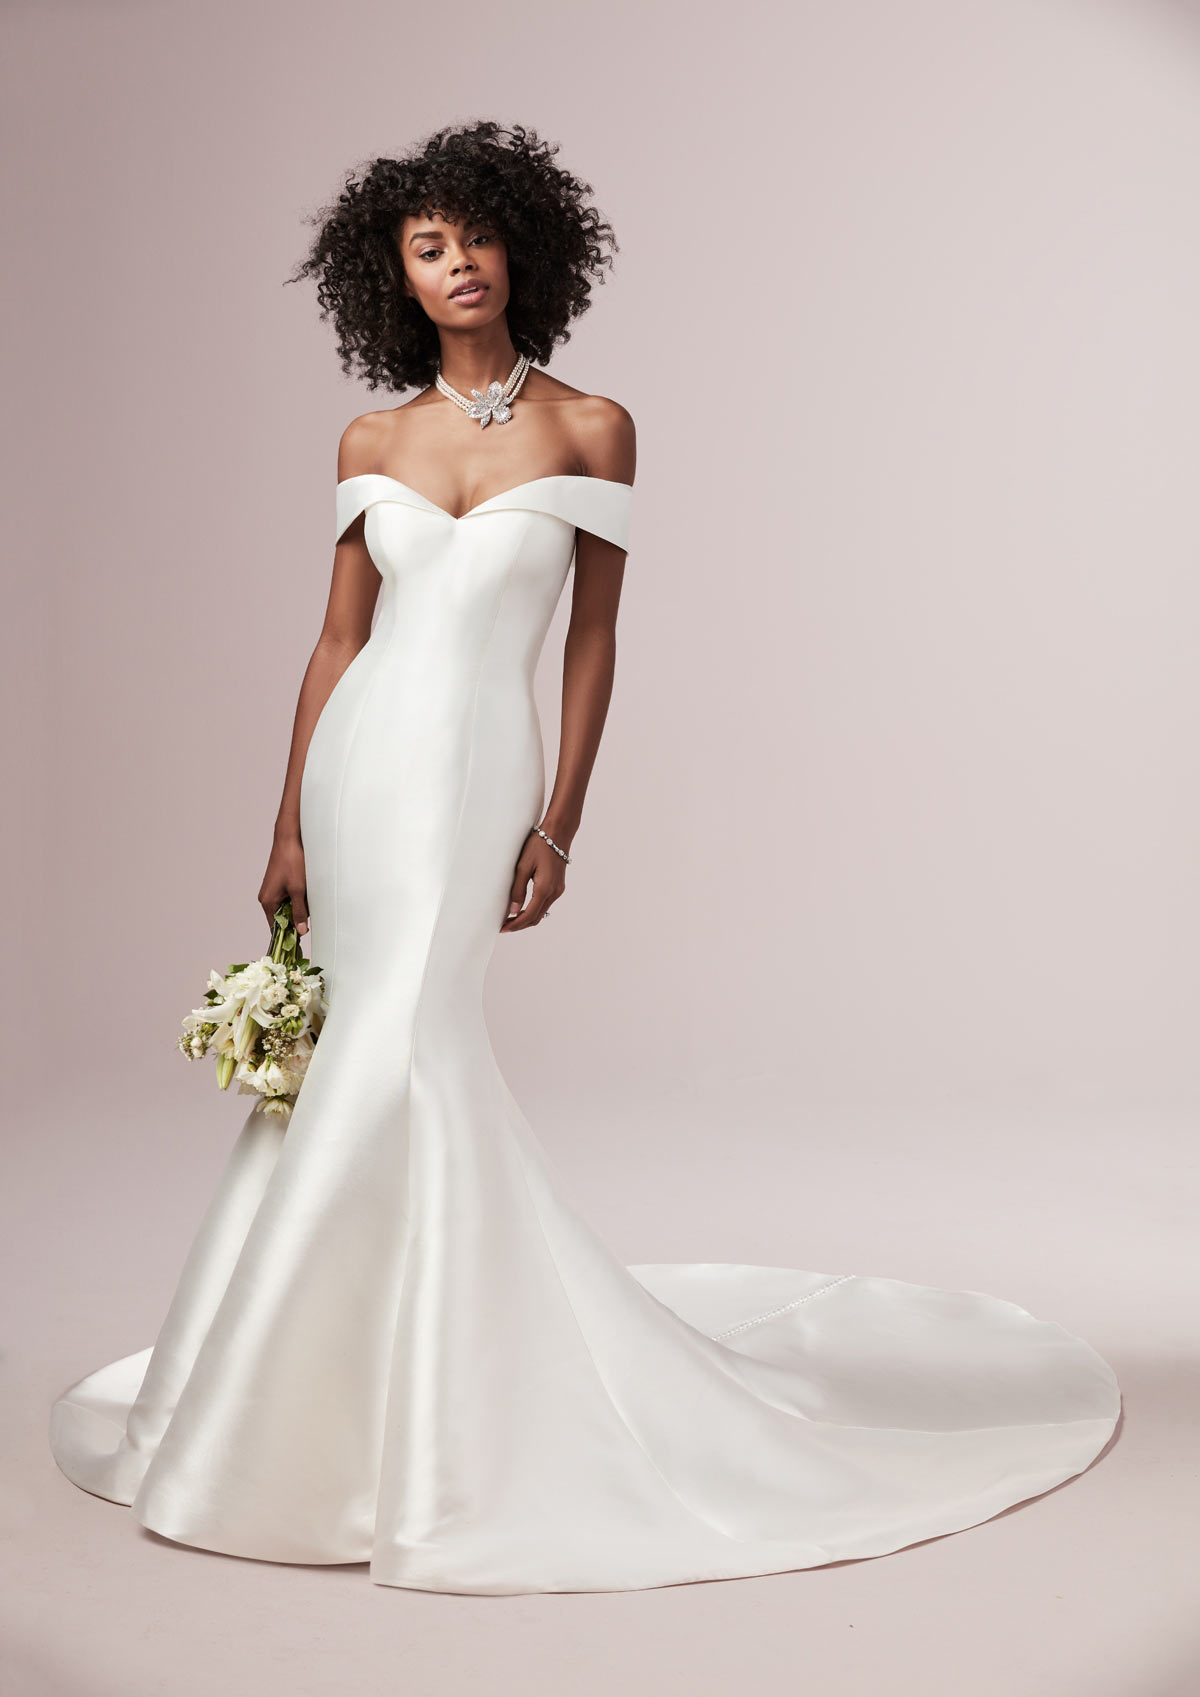 Simple style wedding gowns